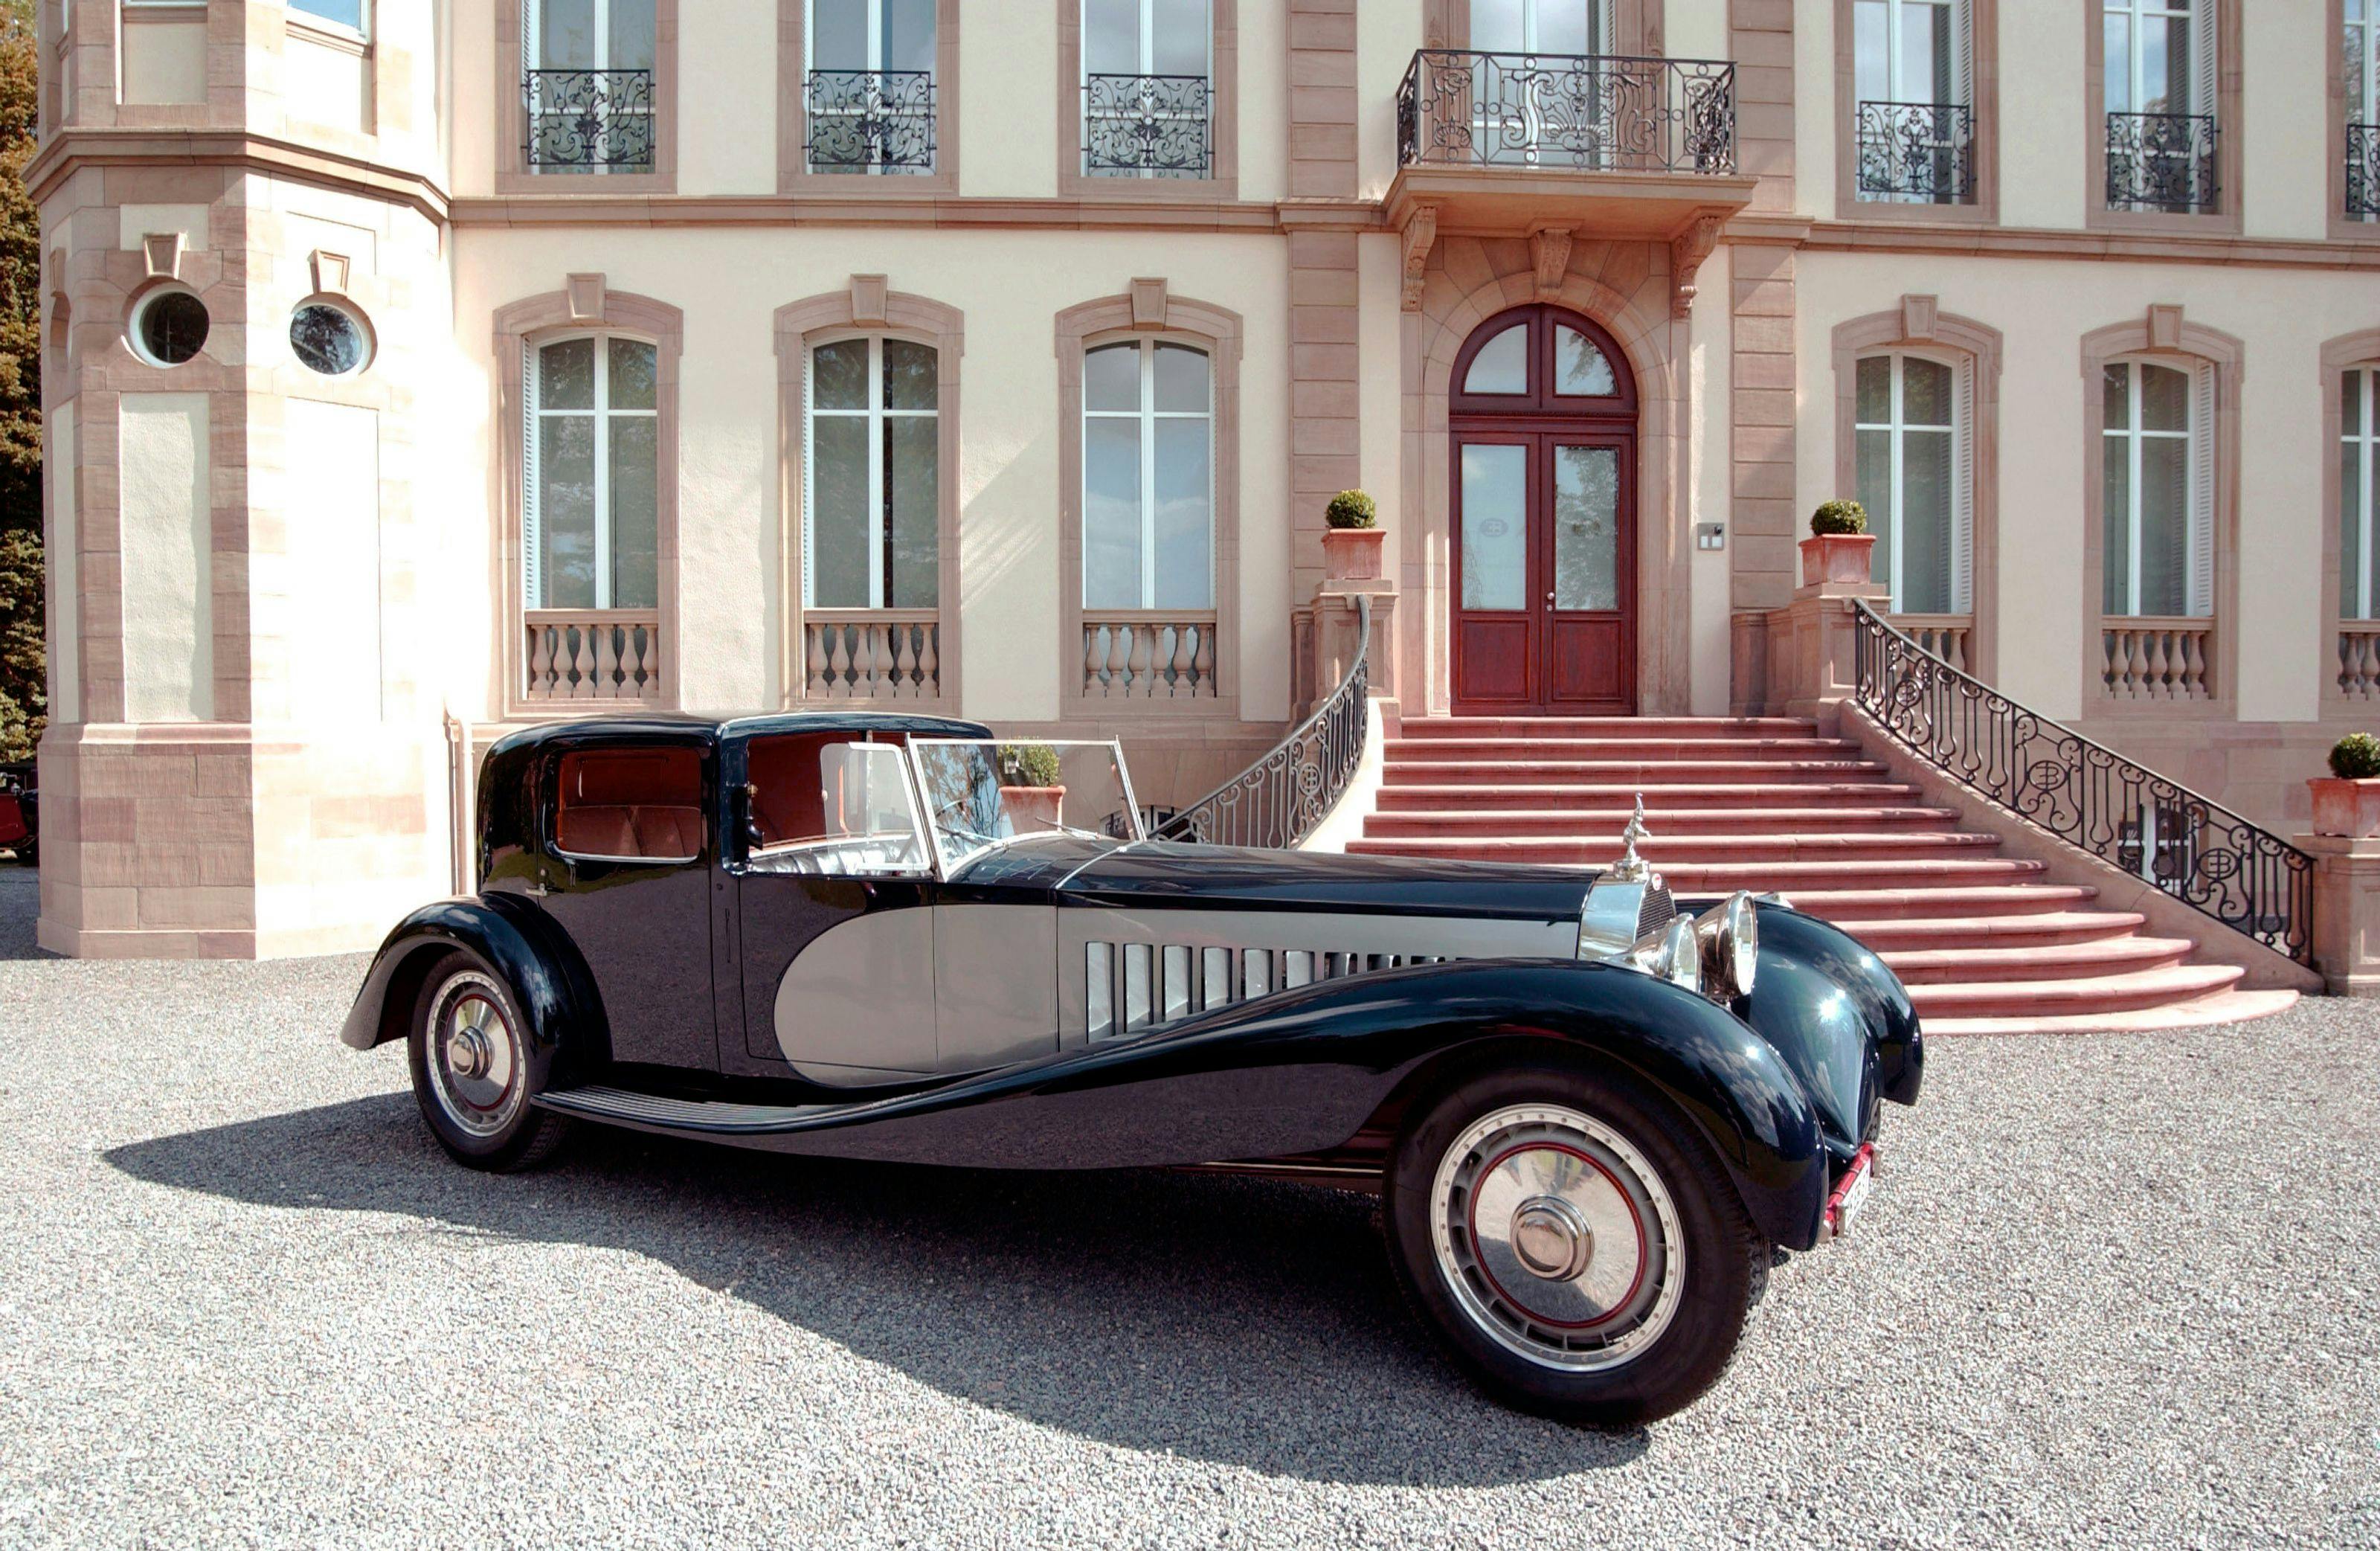 Bugatti presents the Type 41 Royale at the Goodwood Festival of Speed 2013